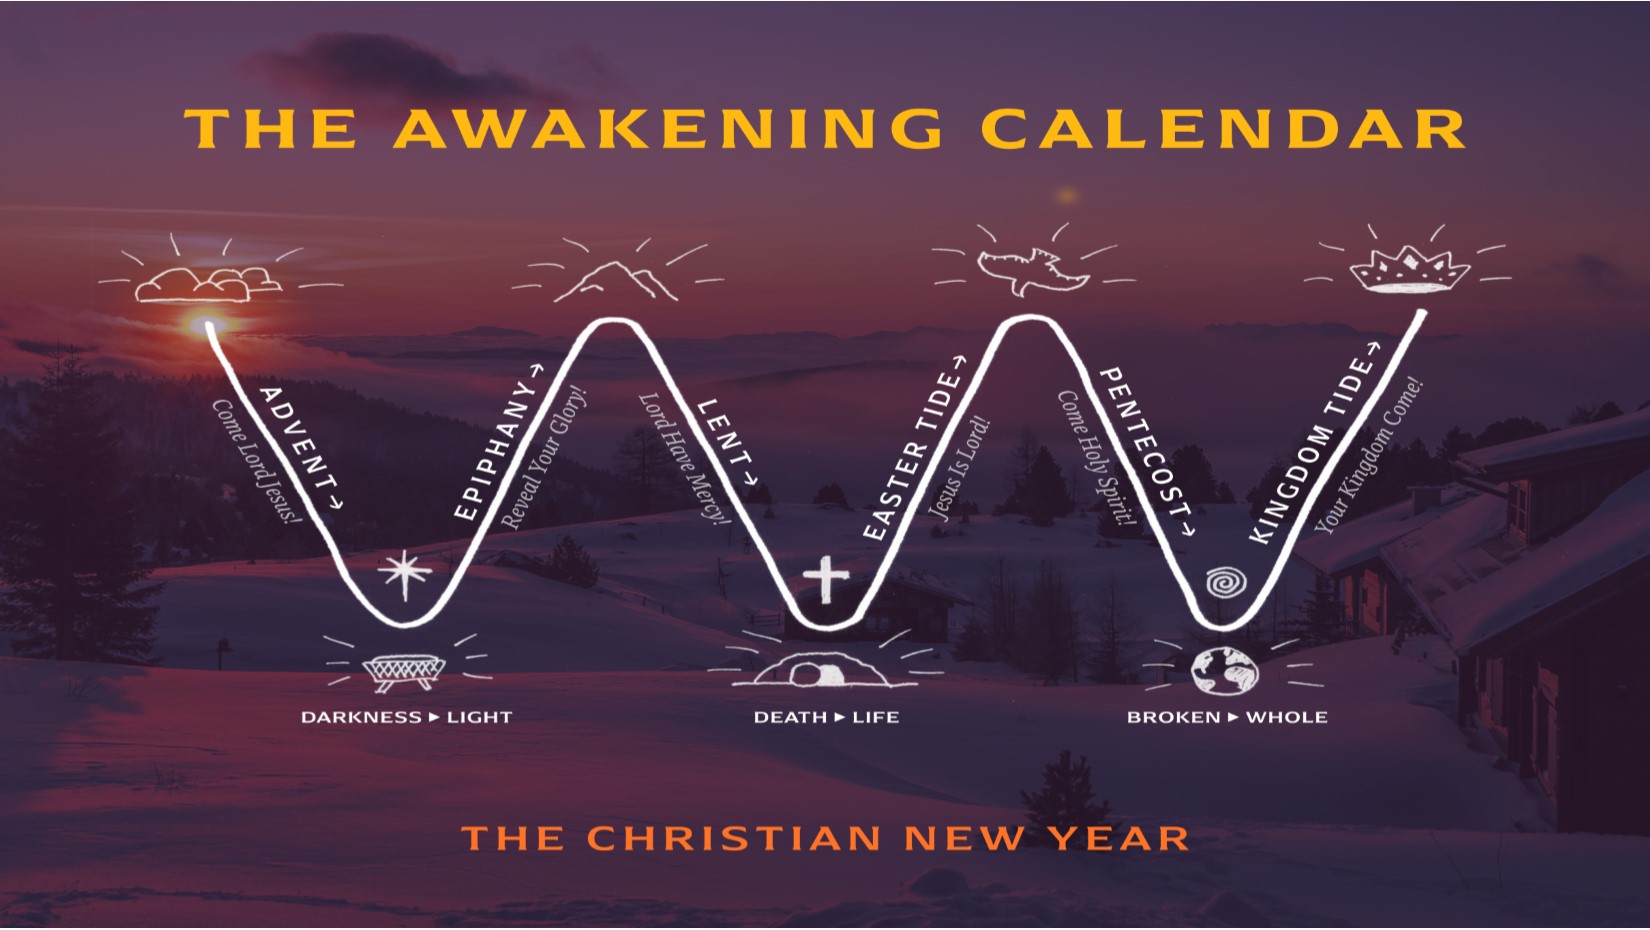 12.20.2020  The Christian New Year: A New Year of Repentance  Matthew 1:18 – 25